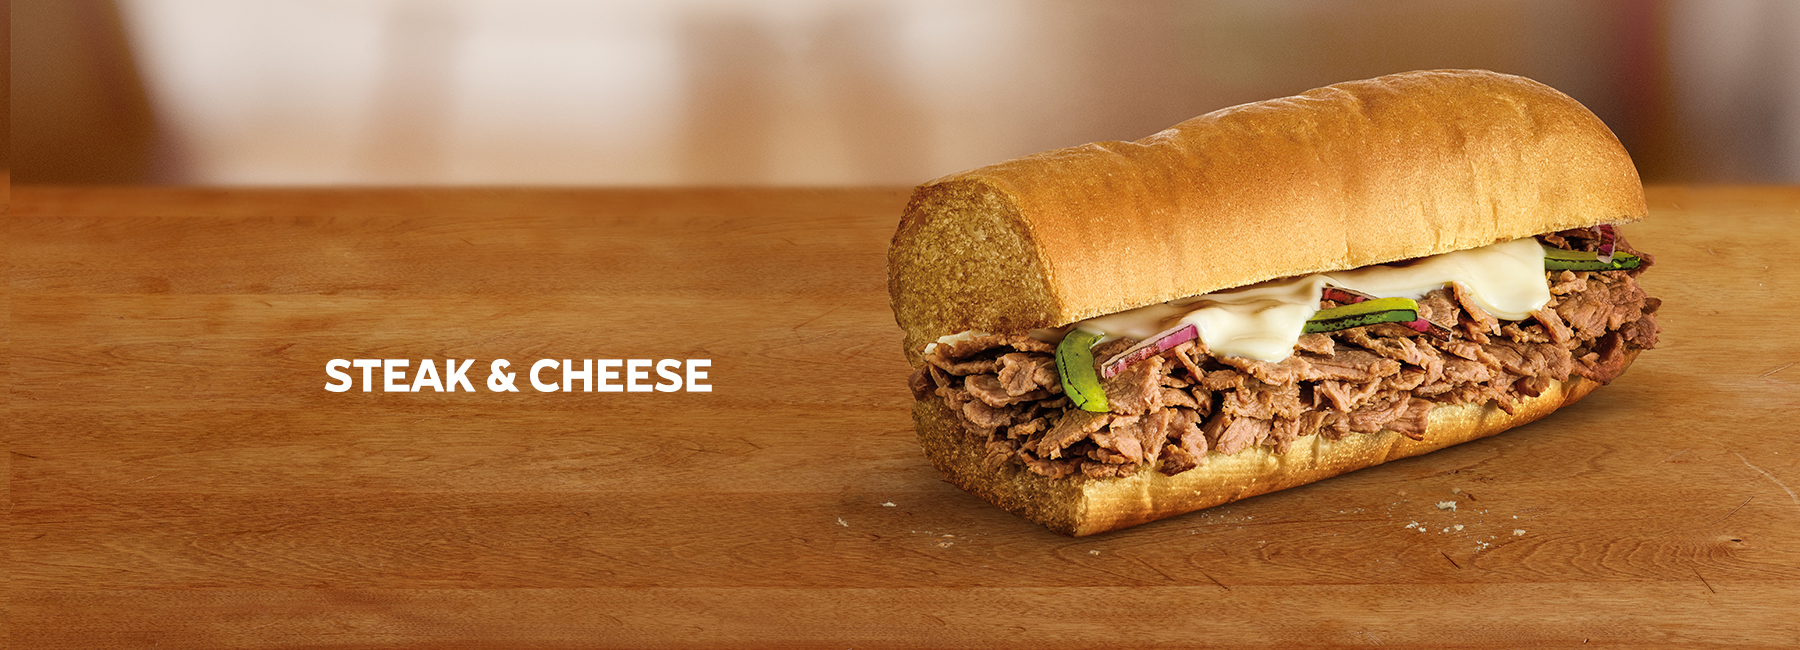 subway steak and cheese nutrition